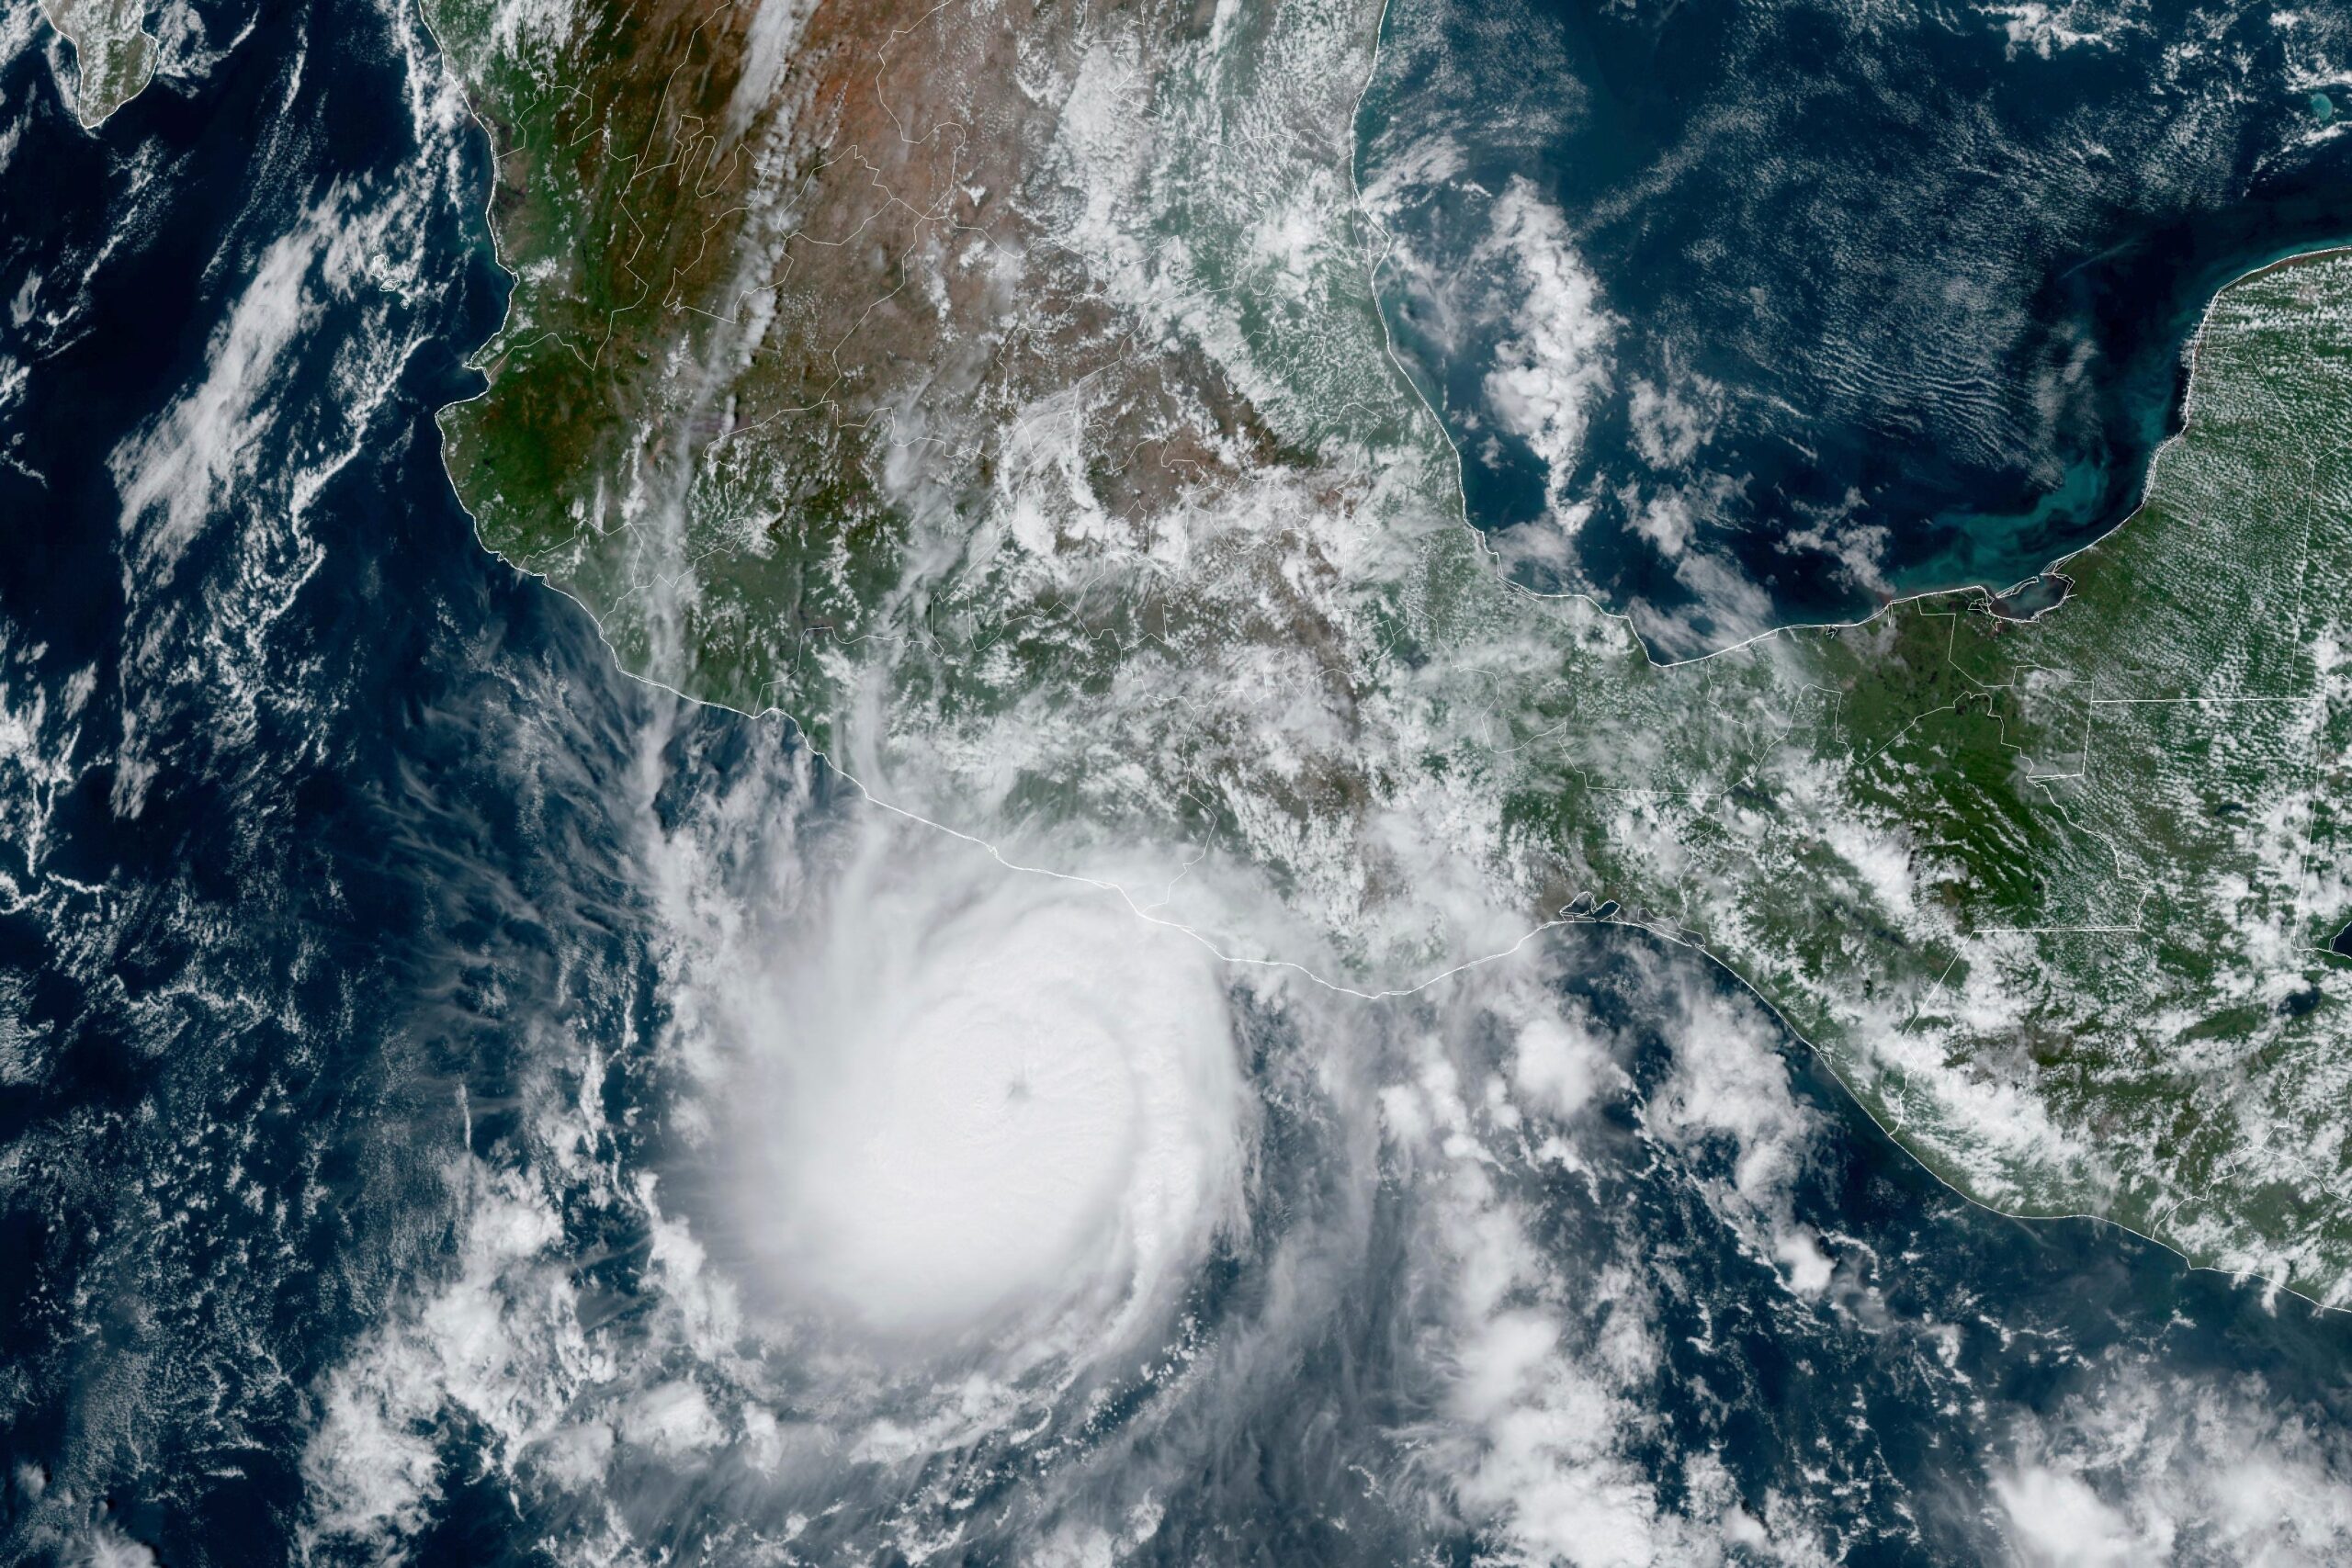 Mexico is preparing for the arrival of Hurricane Otis, which is expected to be a category 5 storm with potentially devastating effects.